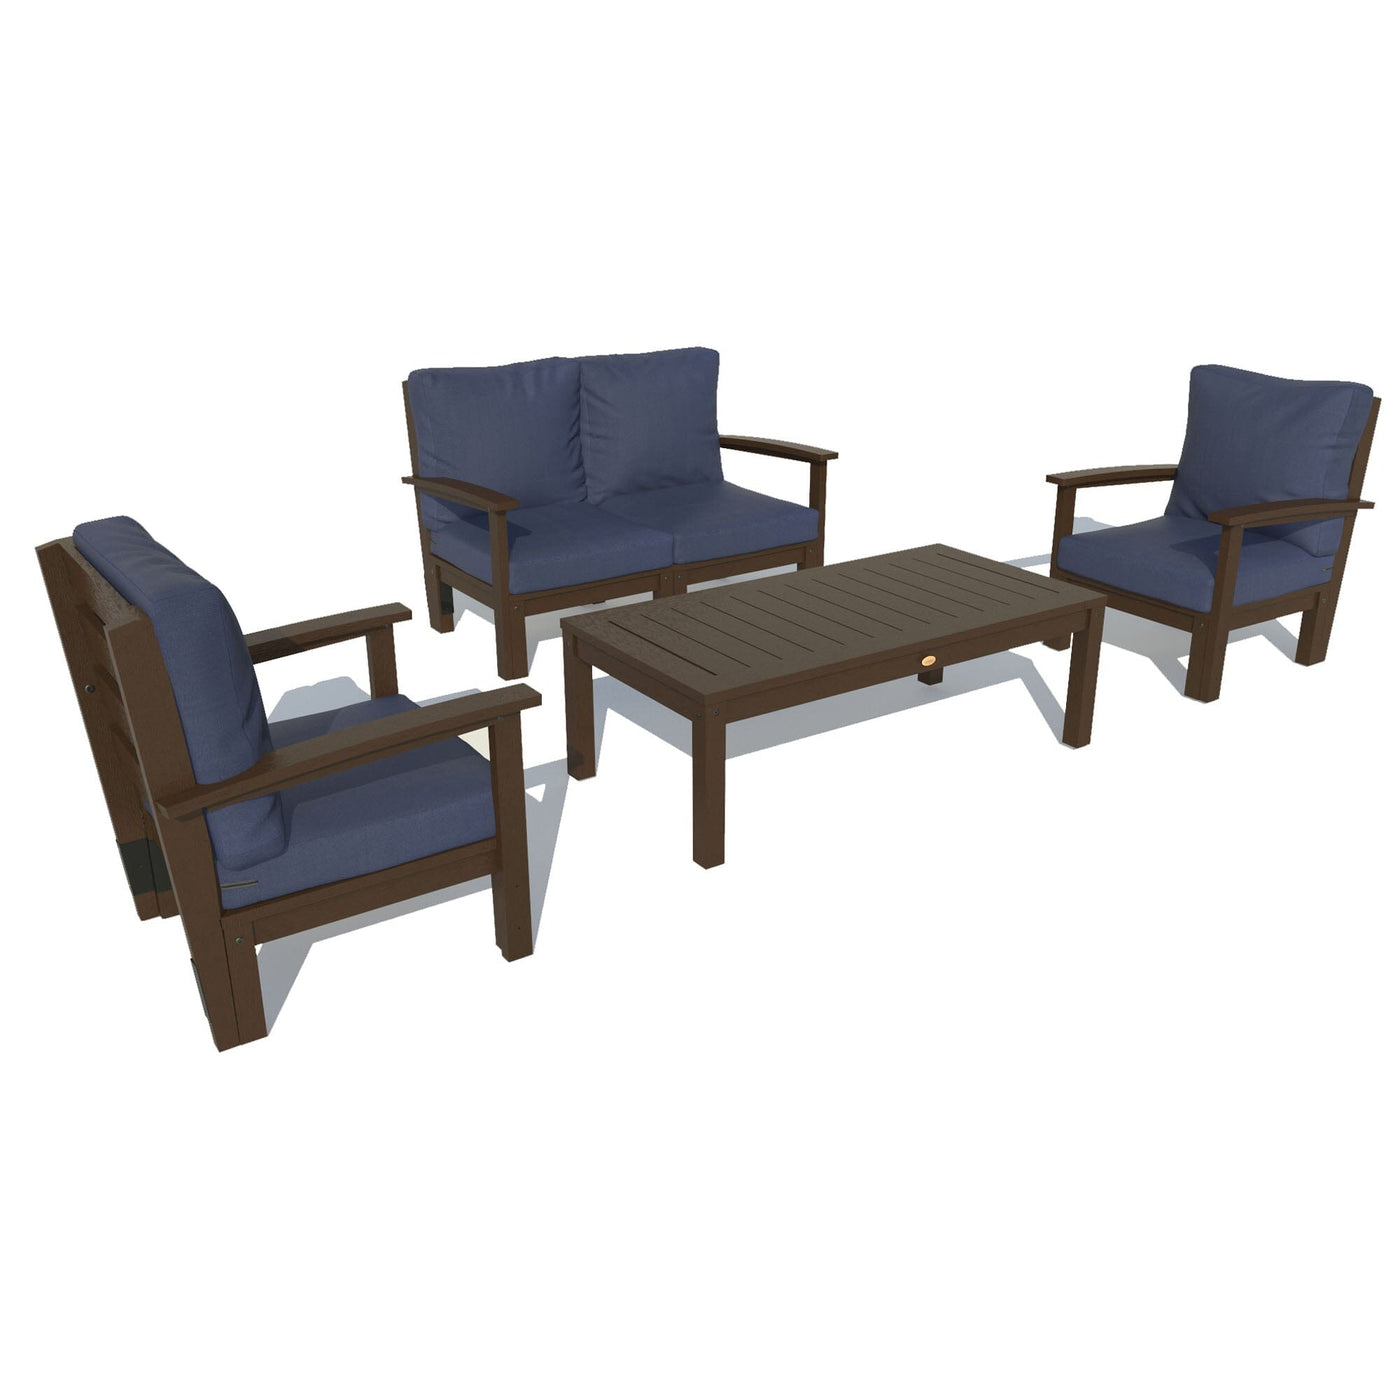 Bespoke Deep Seating: Loveseat, 2 Chair Set, and Conversation Table Deep Seating Highwood USA Navy Weathered Acorn 